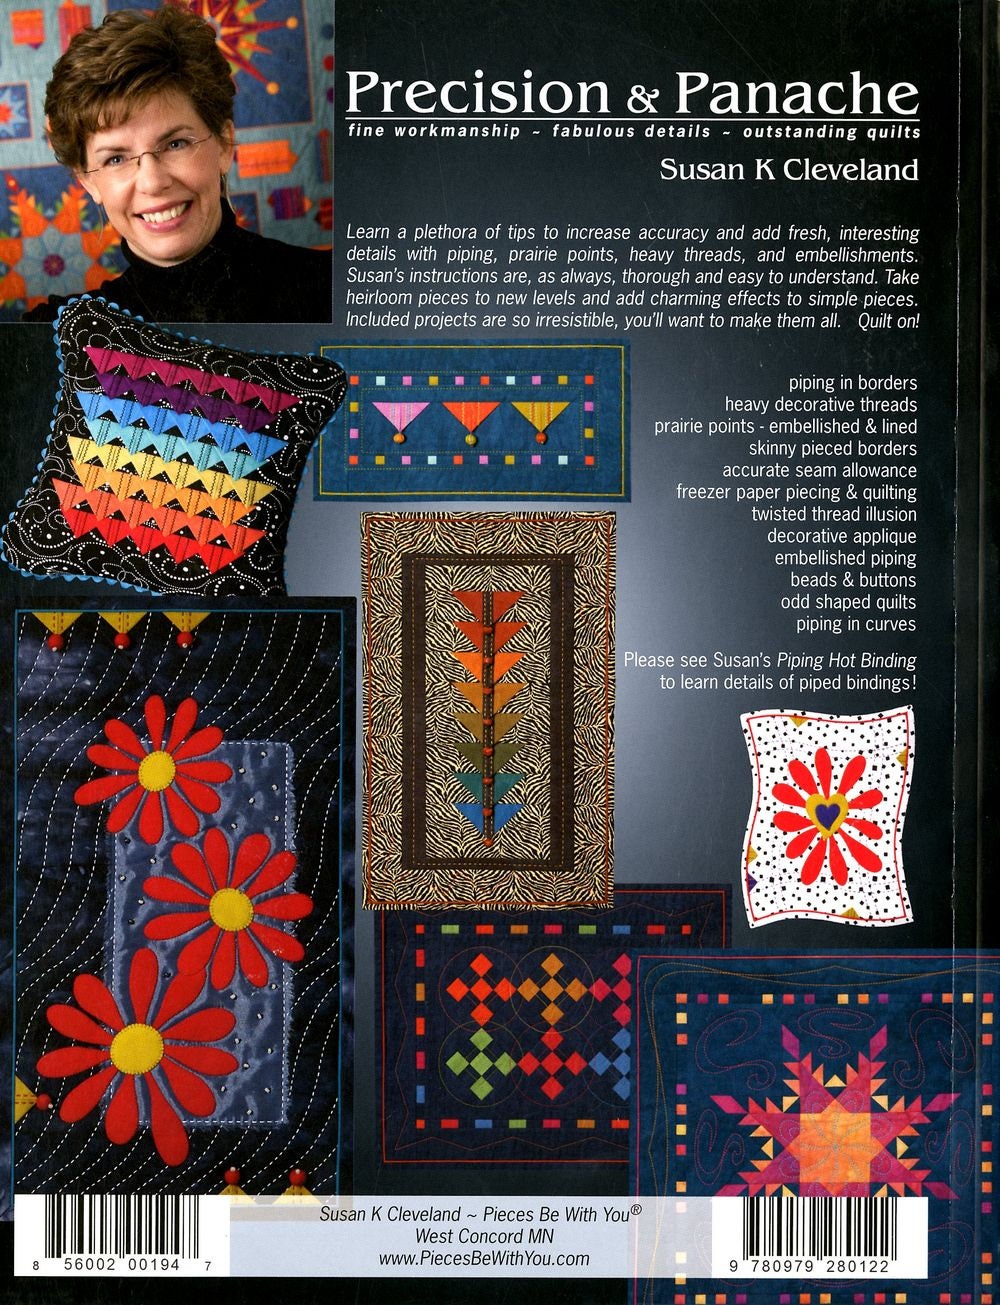 Precision And Panache Quilt Pattern Book by Susan K Cleveland of Pieces Be With You